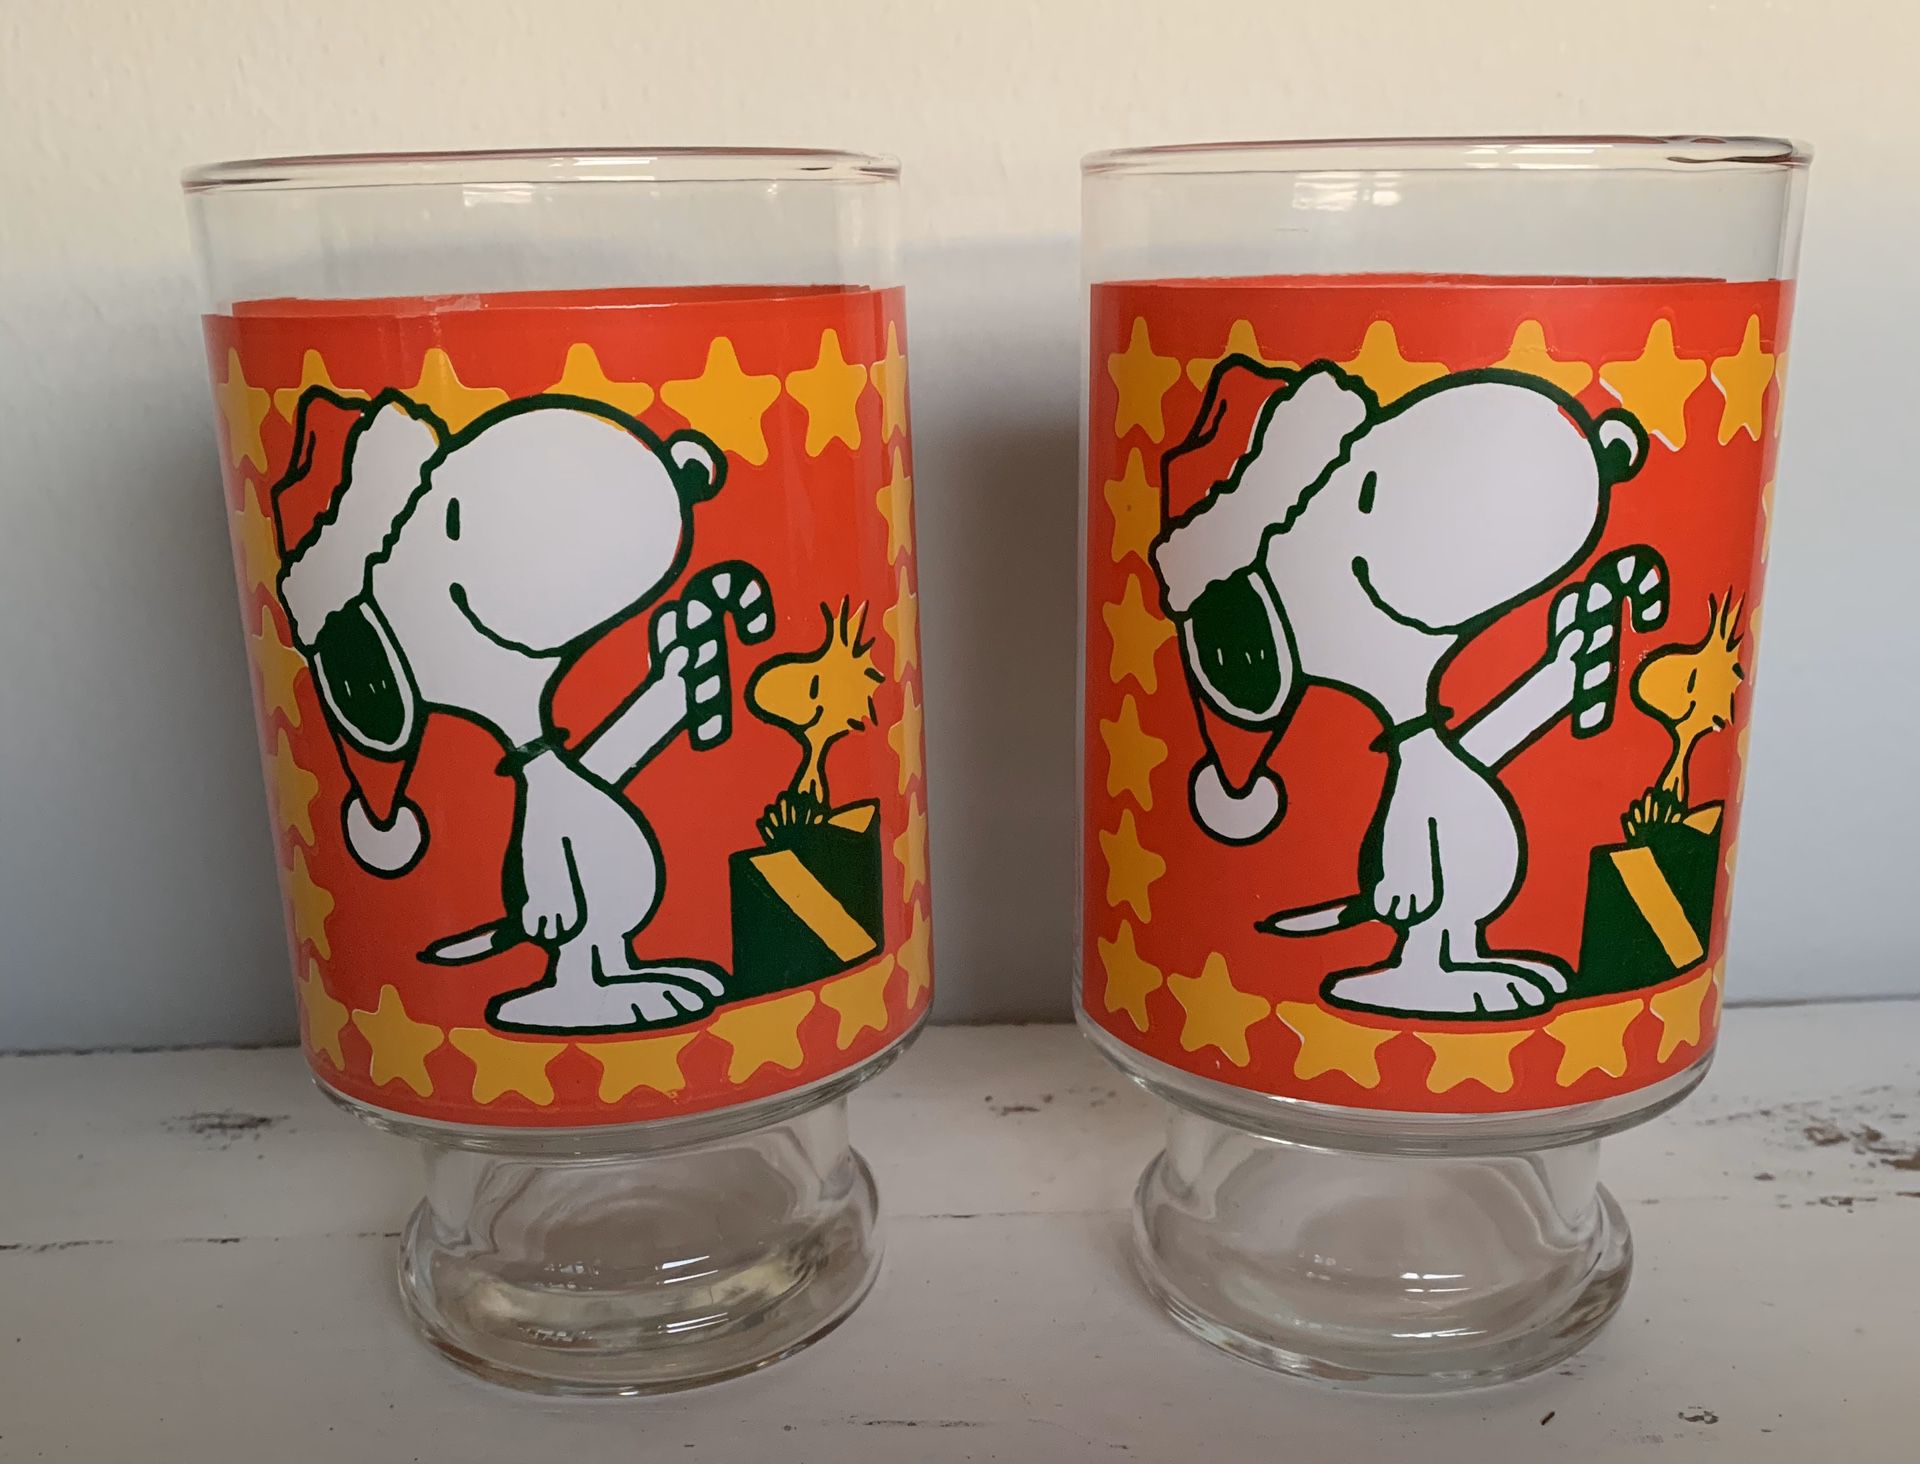 Vintage 1965 Peanuts Snoopy and Woodstock BIG 32 oz. Christmas Glass. I have two of these available. Buy one or both. Price is $10 per glass. Featu